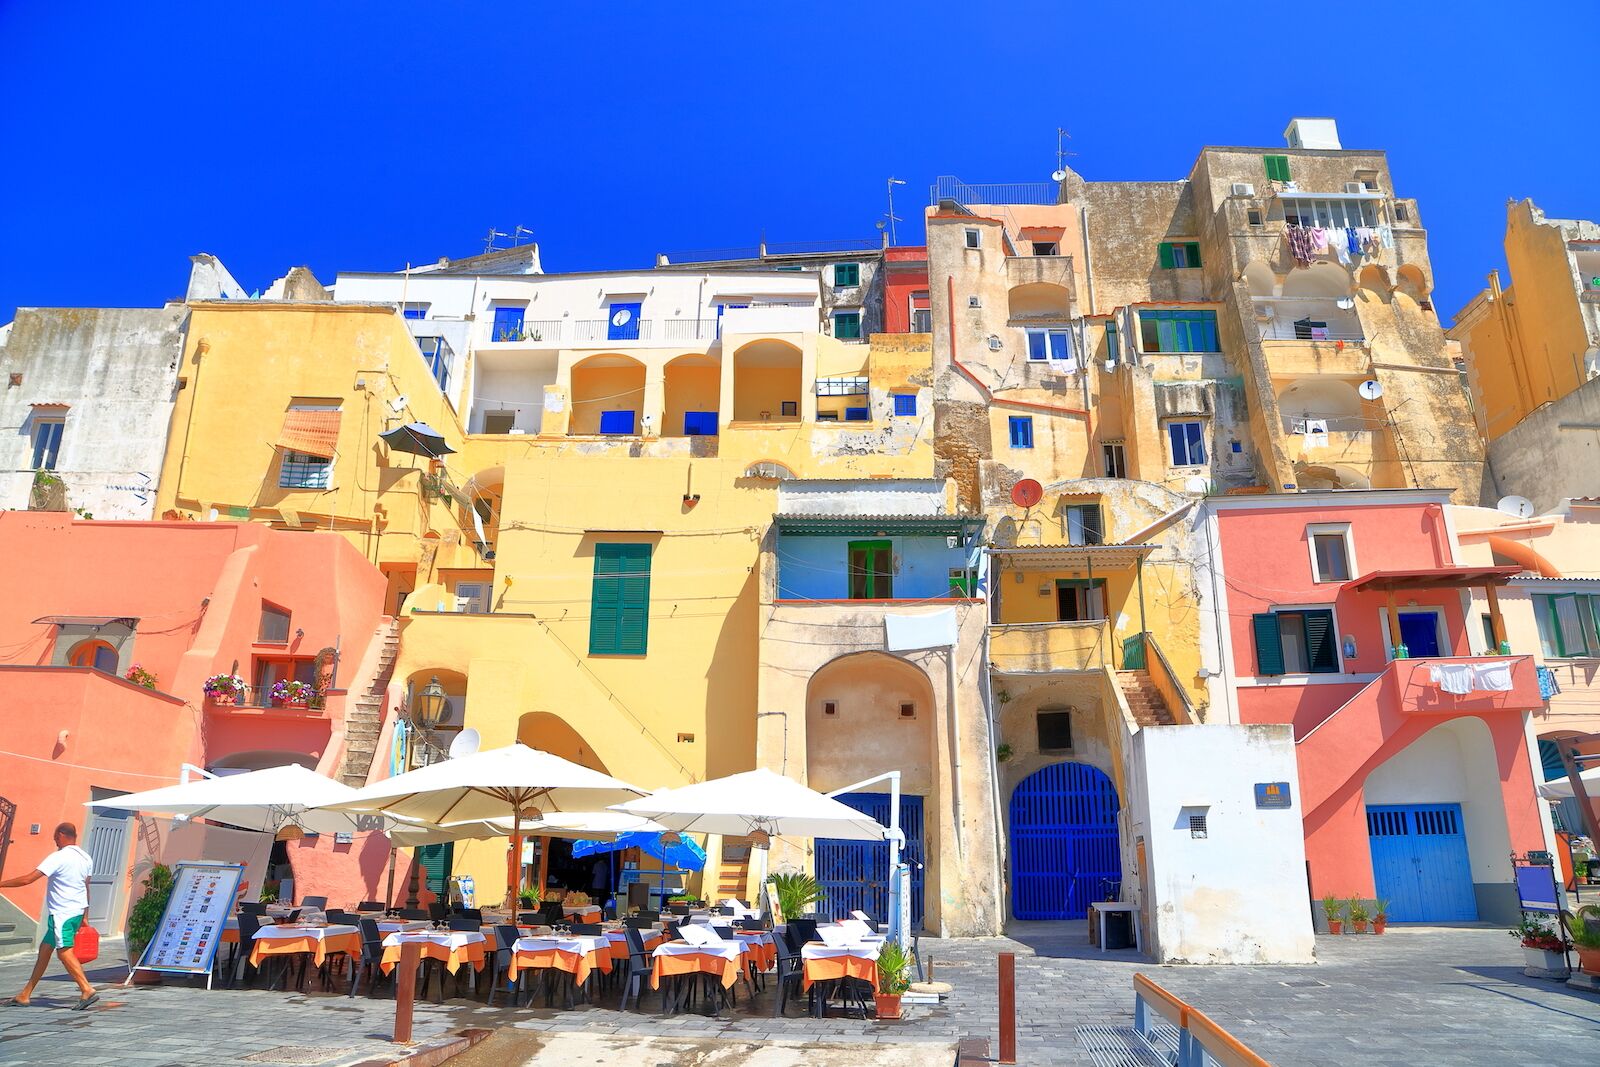 procida-italy-restaurant-with-view-of-marina and a man walking by